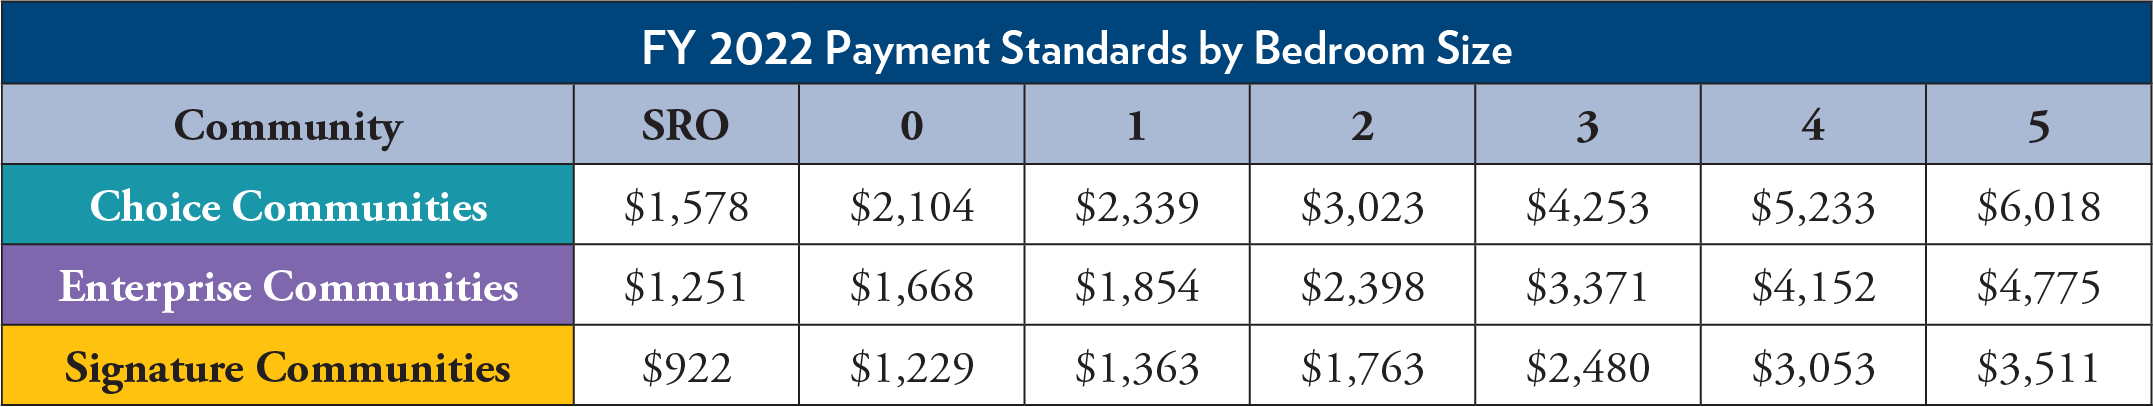 FY 2022 Payment Standards by Bedroom Size